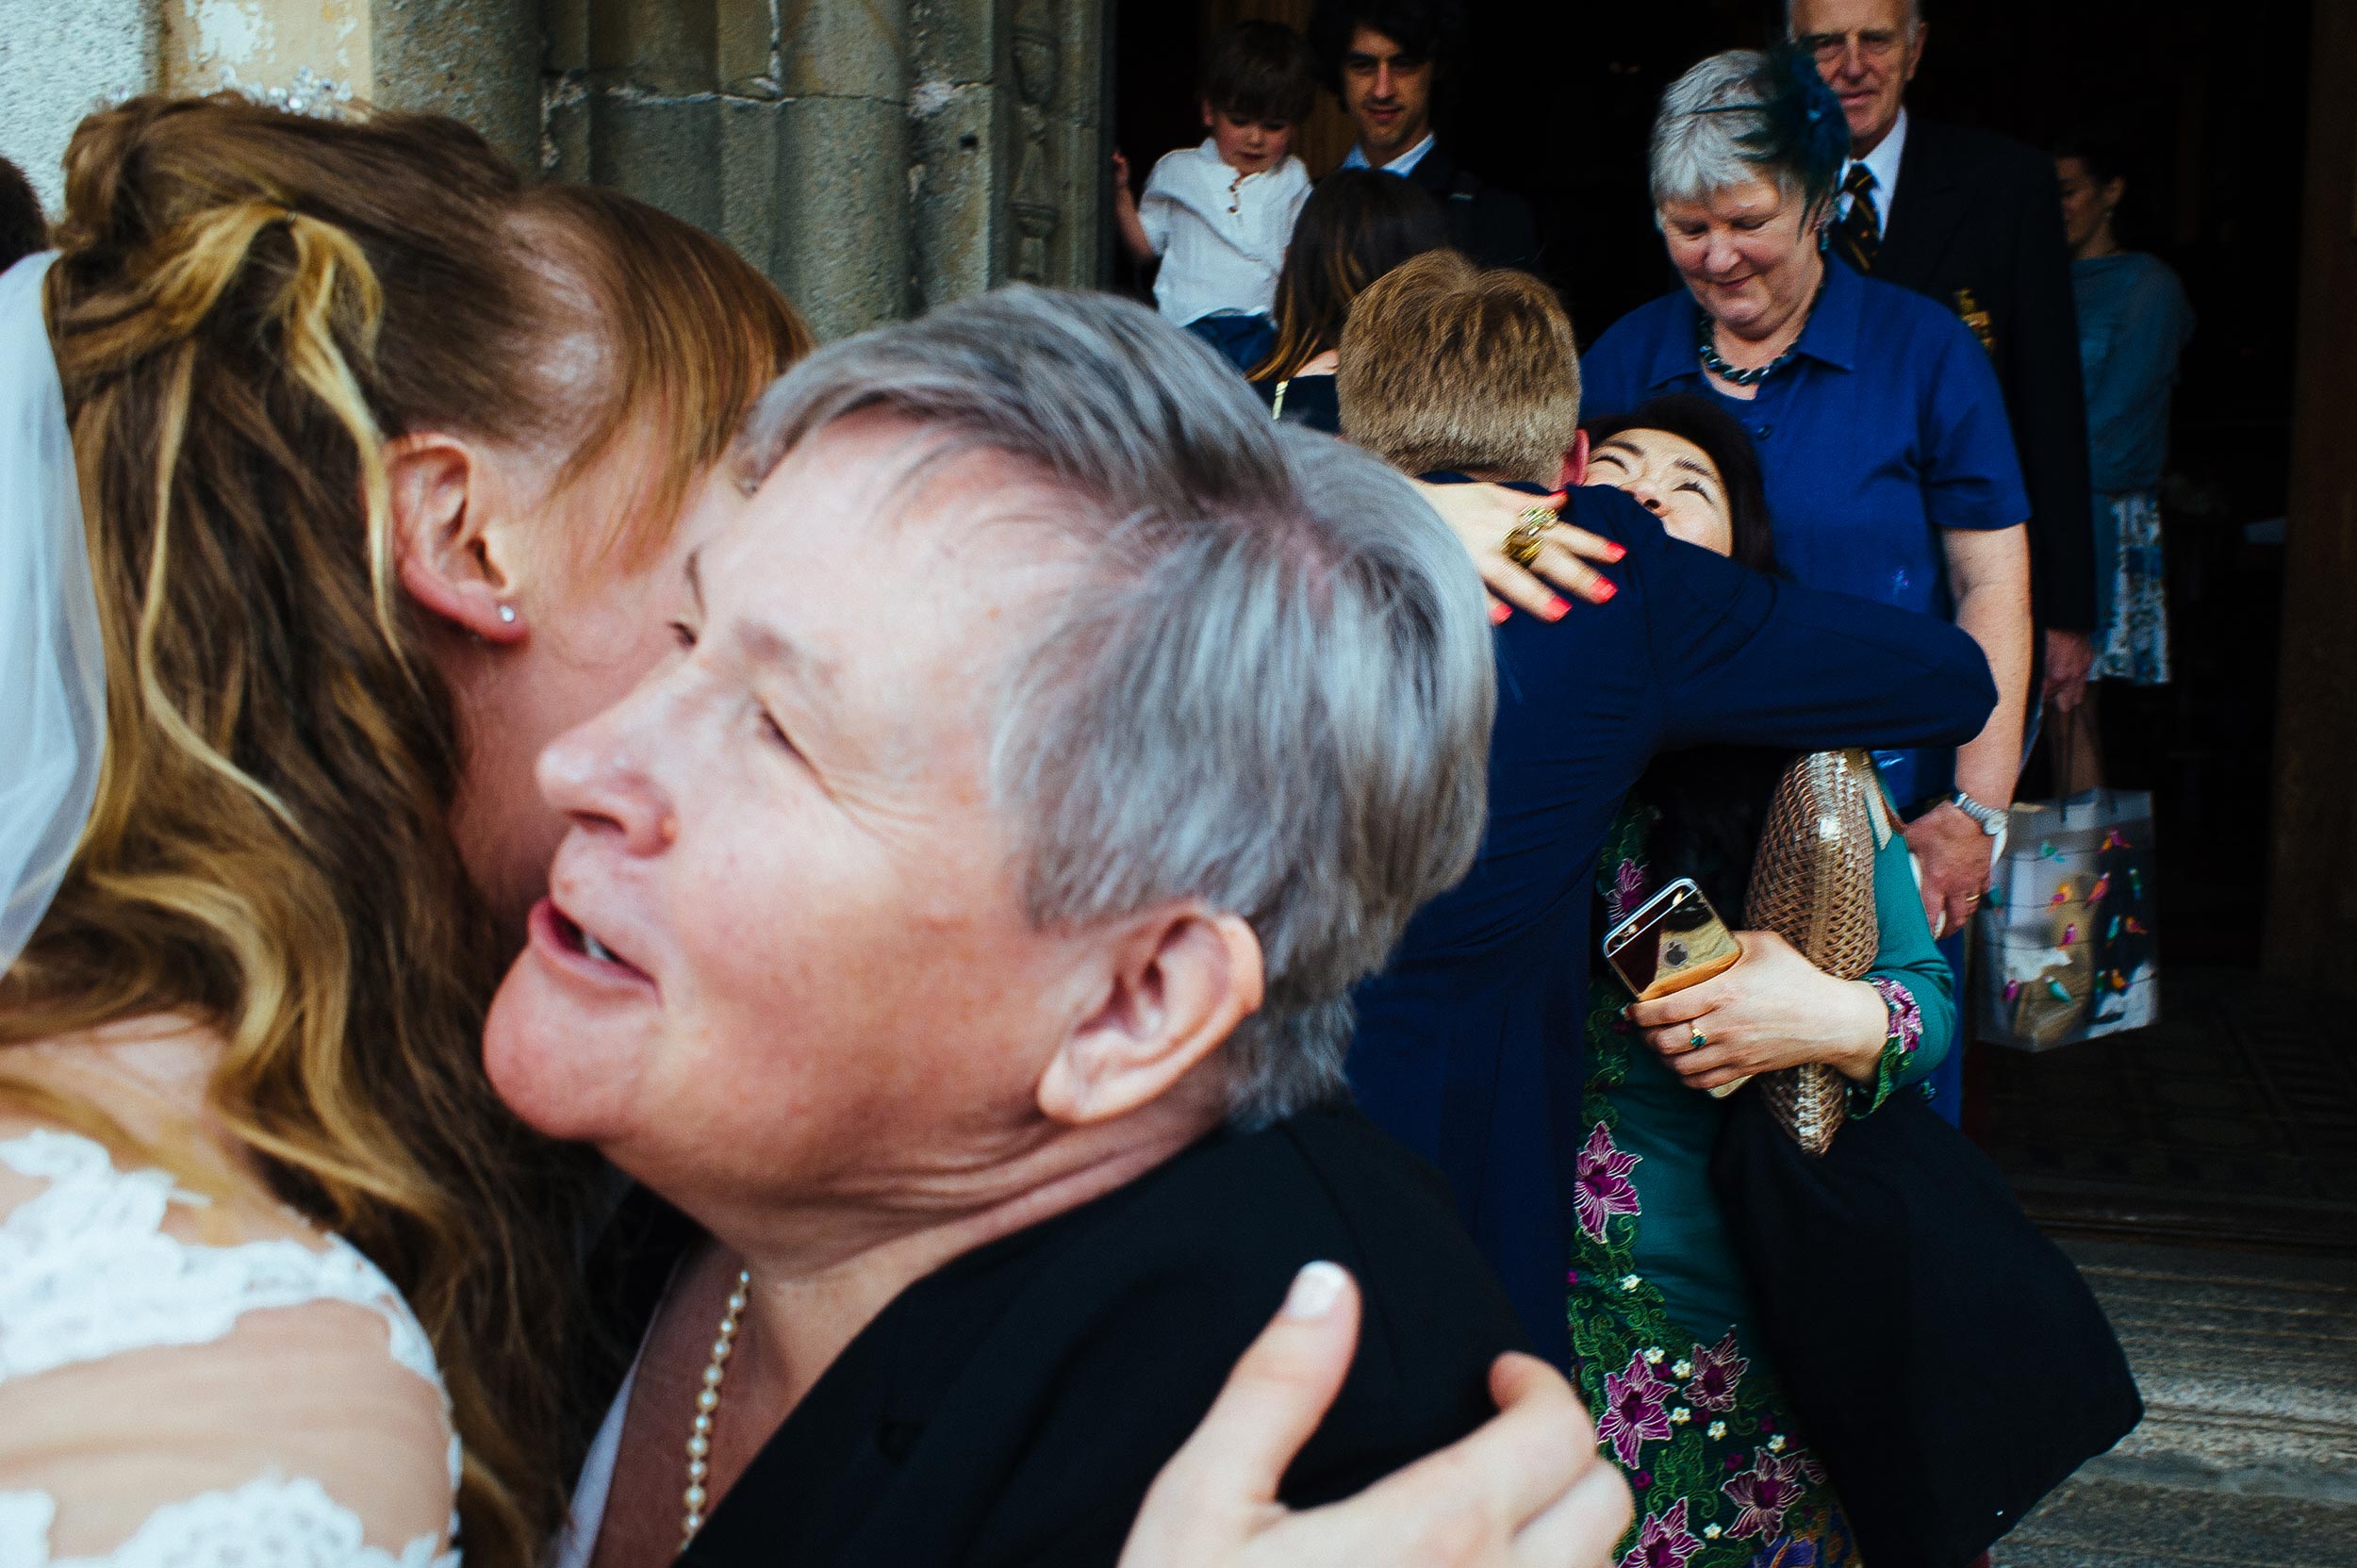 bride-and-groom-kissing-people-outside-the-church-wedding-lake-orta-italy.jpg